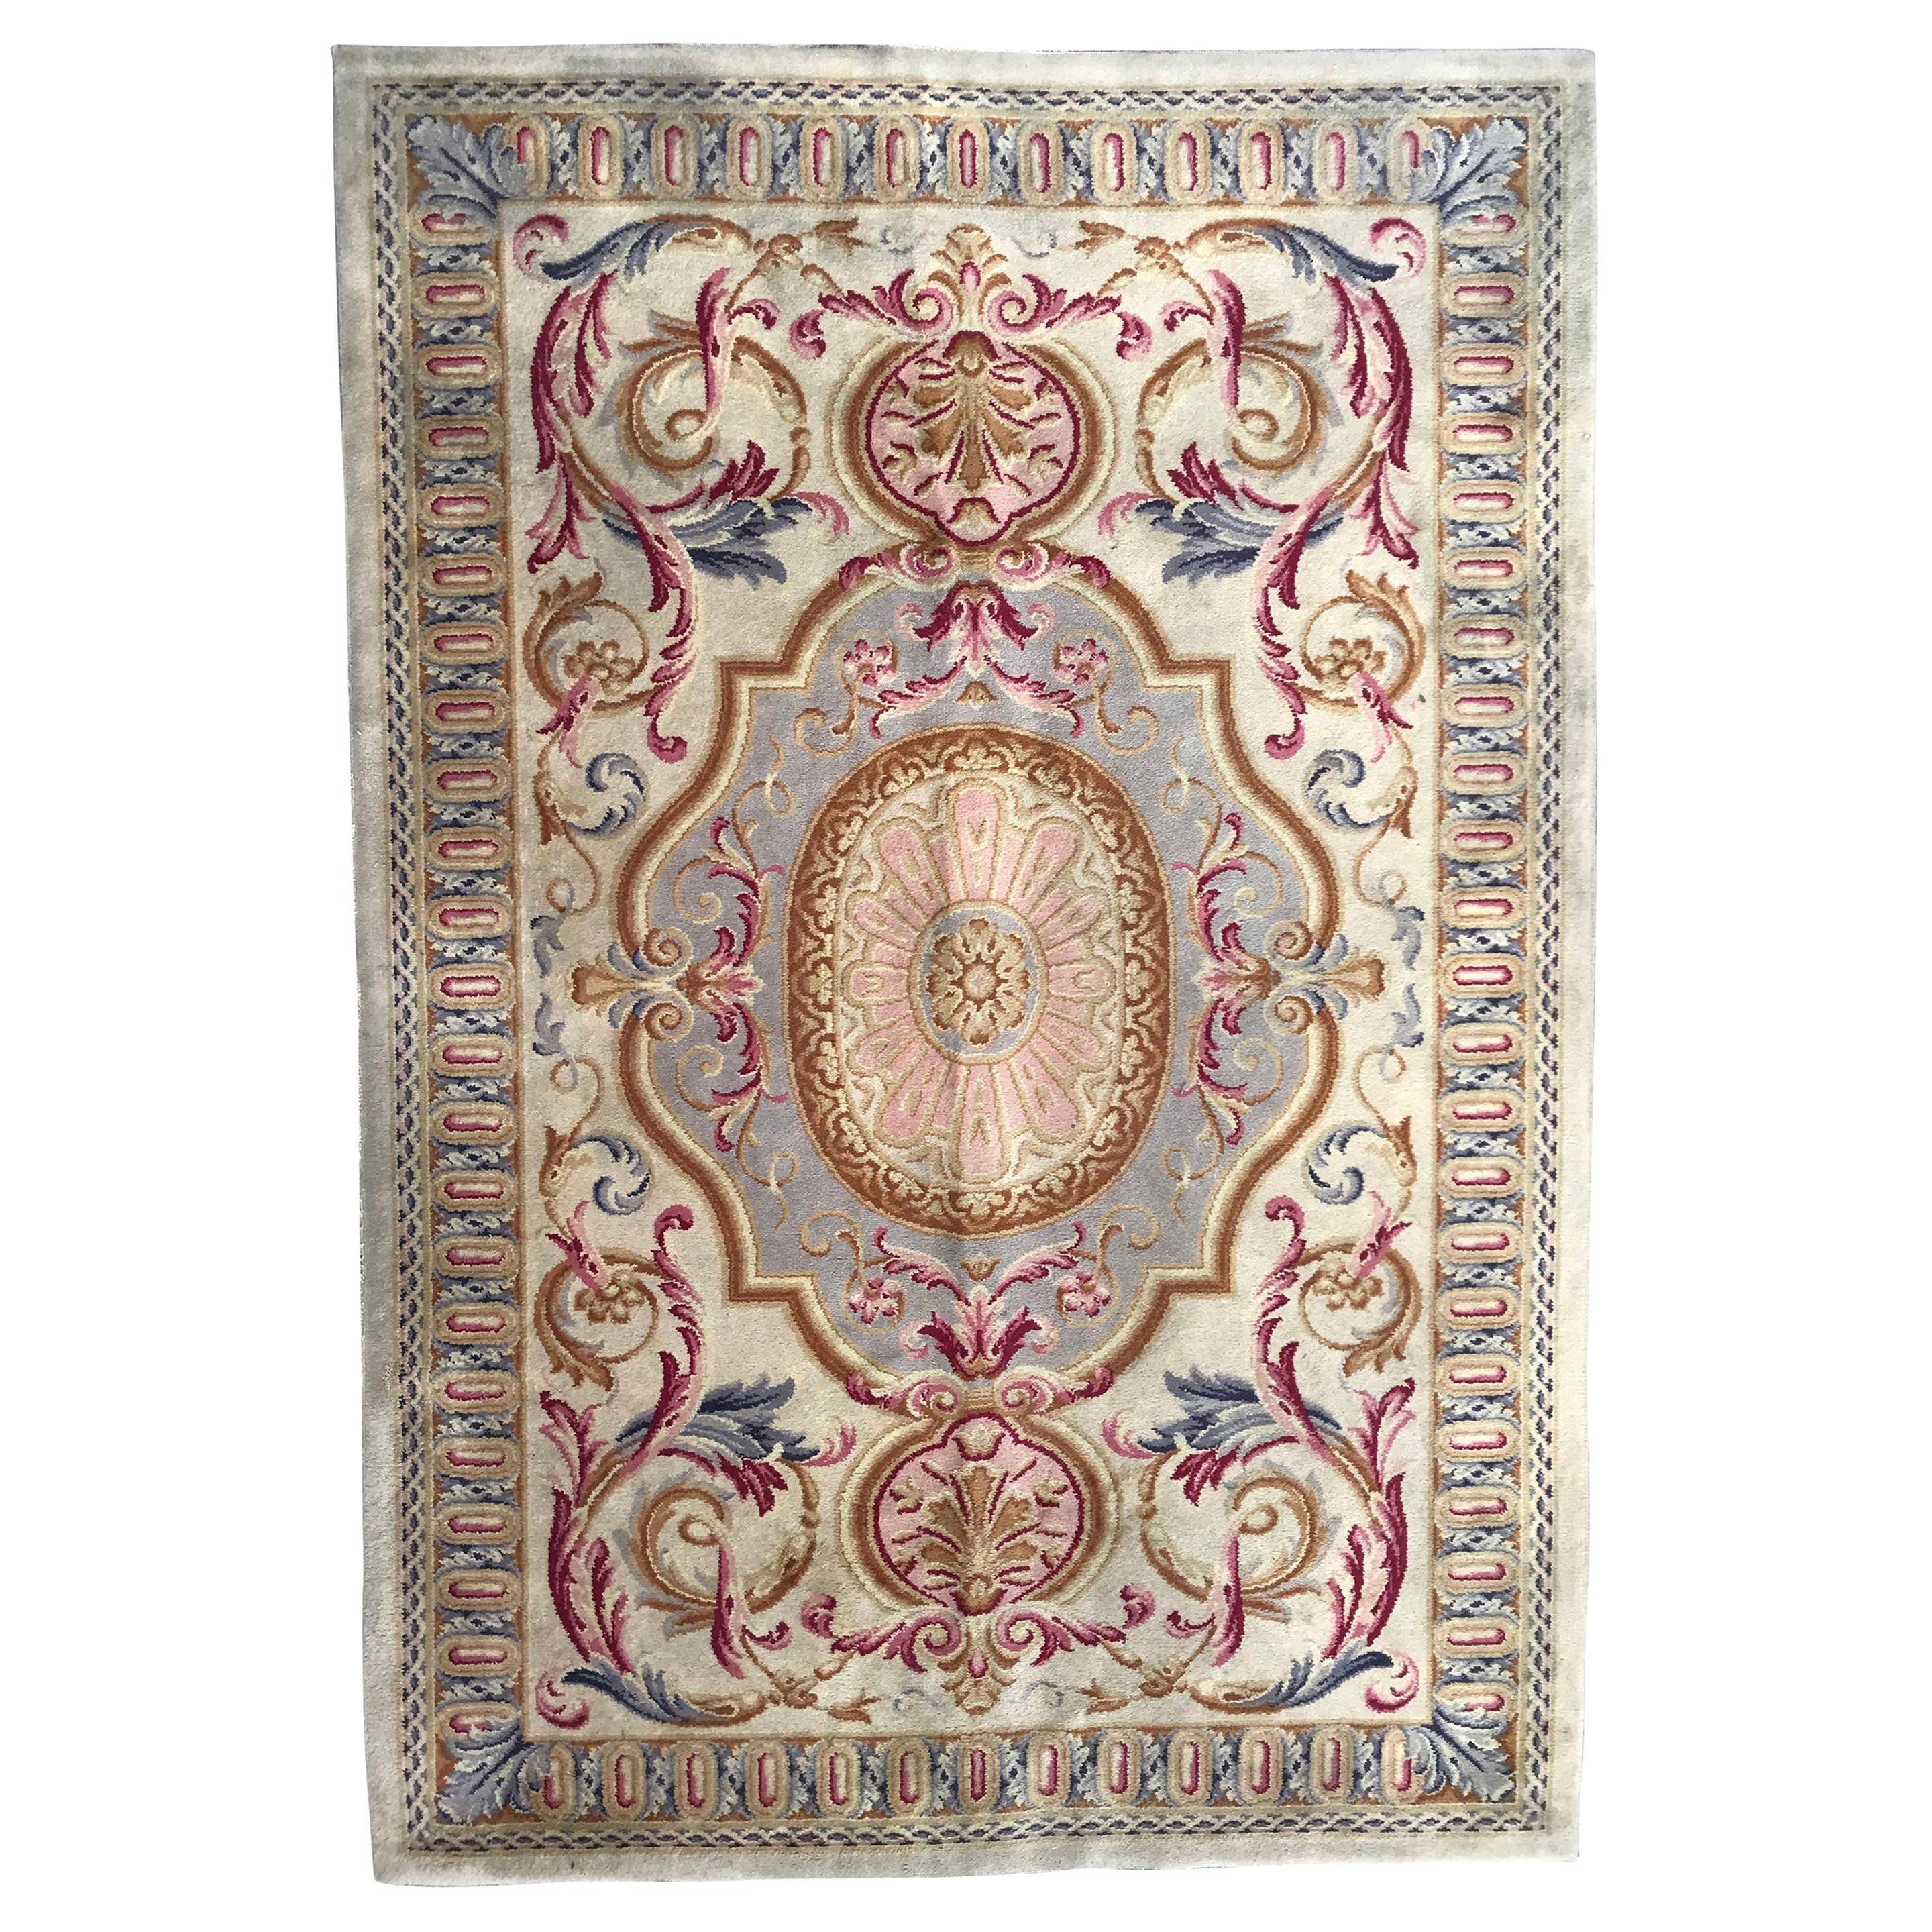 Bobyrug's Midcentury Knotsted Aubusson Design/One Rugs